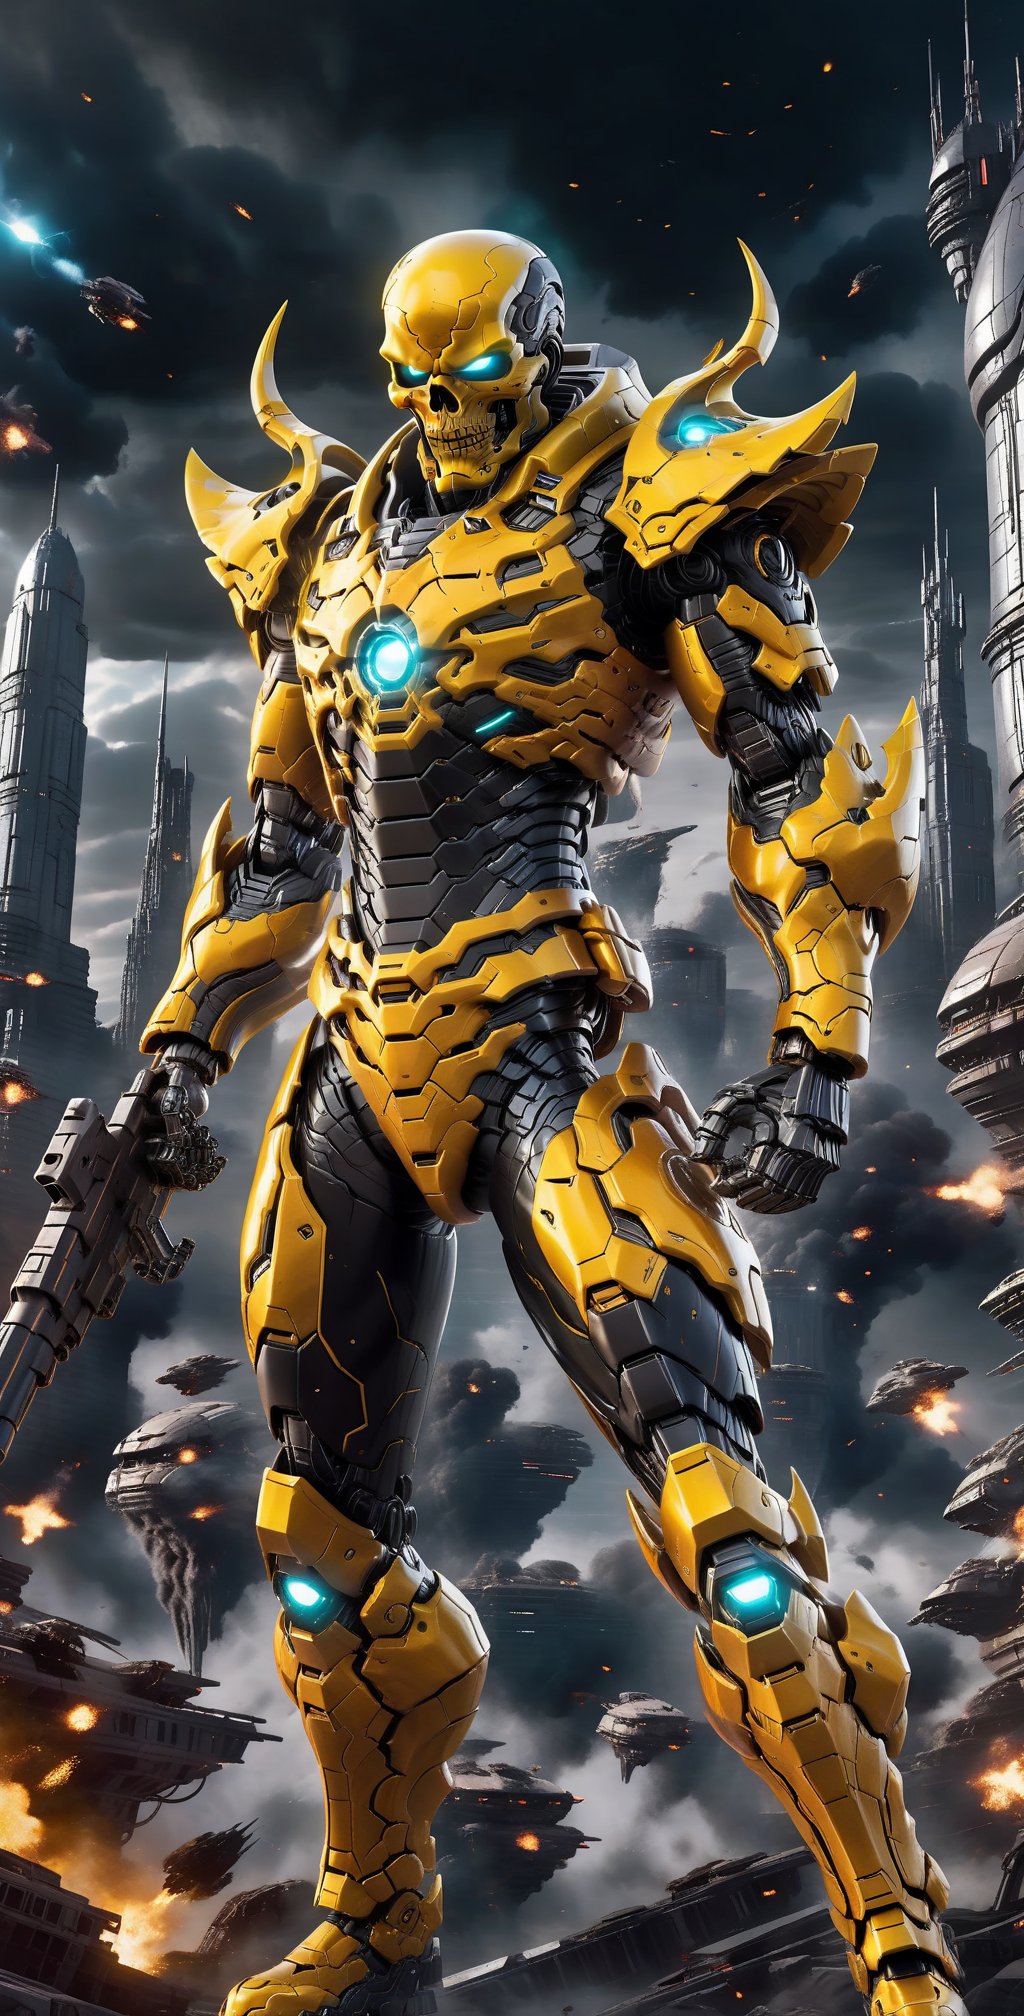 "Visualize yellow-black Skull, the sinister villain, donning a Hi-Tech suit of armor that marries his malevolence with advanced technology. In his hand, he grips a futuristic, lethal Hi-Tech gun, ready to unleash devastation. The scene is set against a backdrop of explosive chaos, underscoring the volatile and treacherous nature of his ambitions." Full body, 